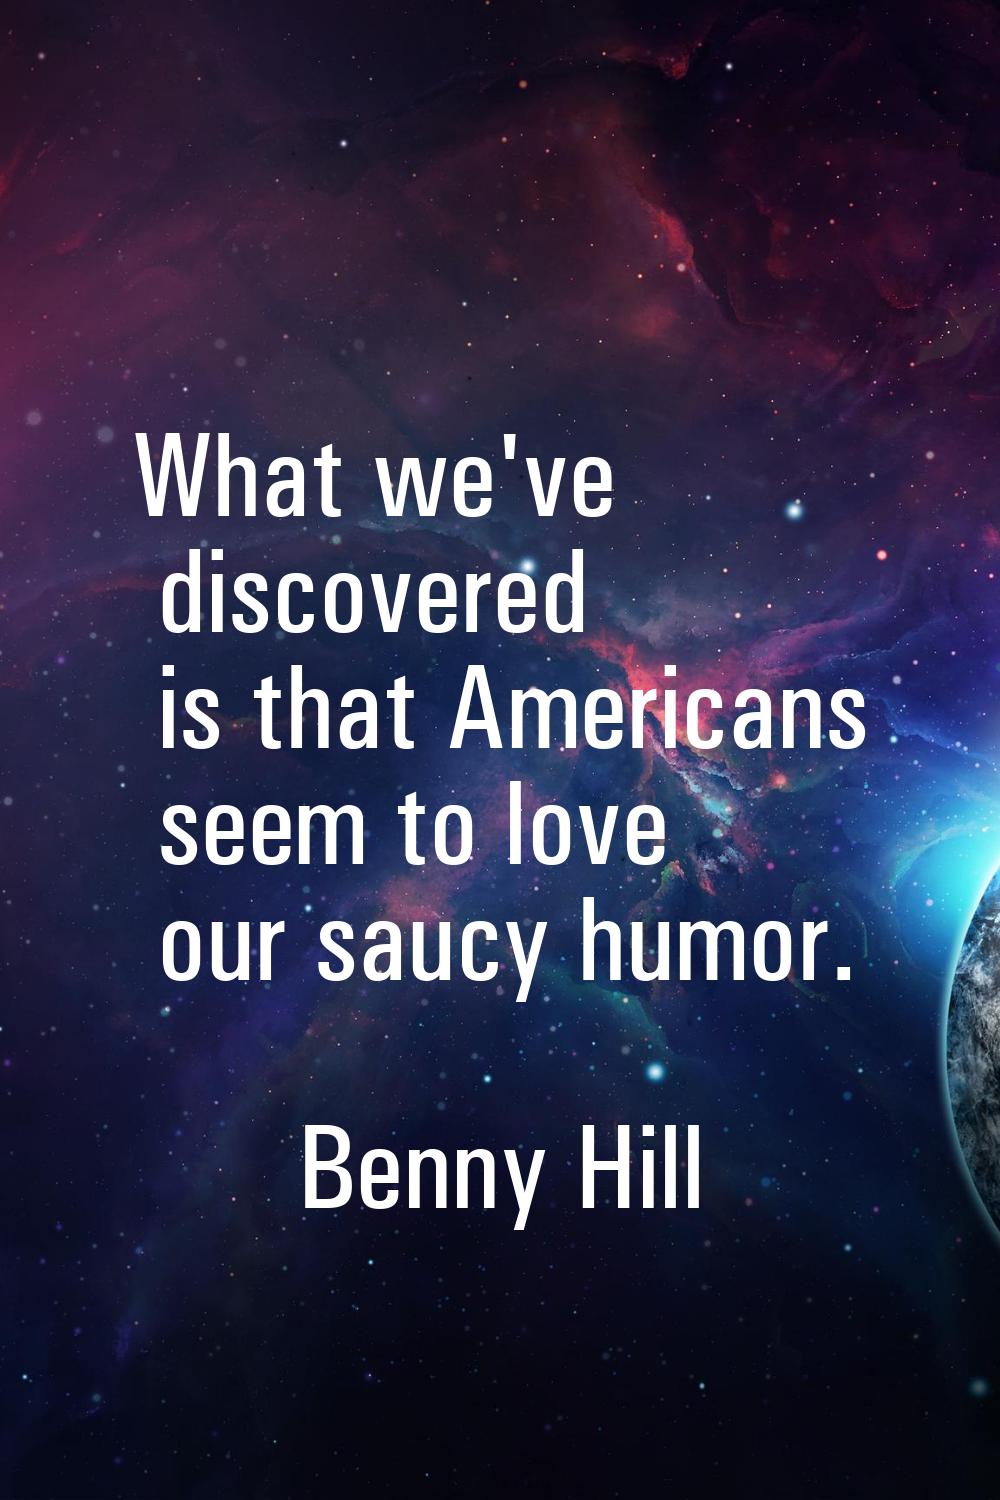 What we've discovered is that Americans seem to love our saucy humor.